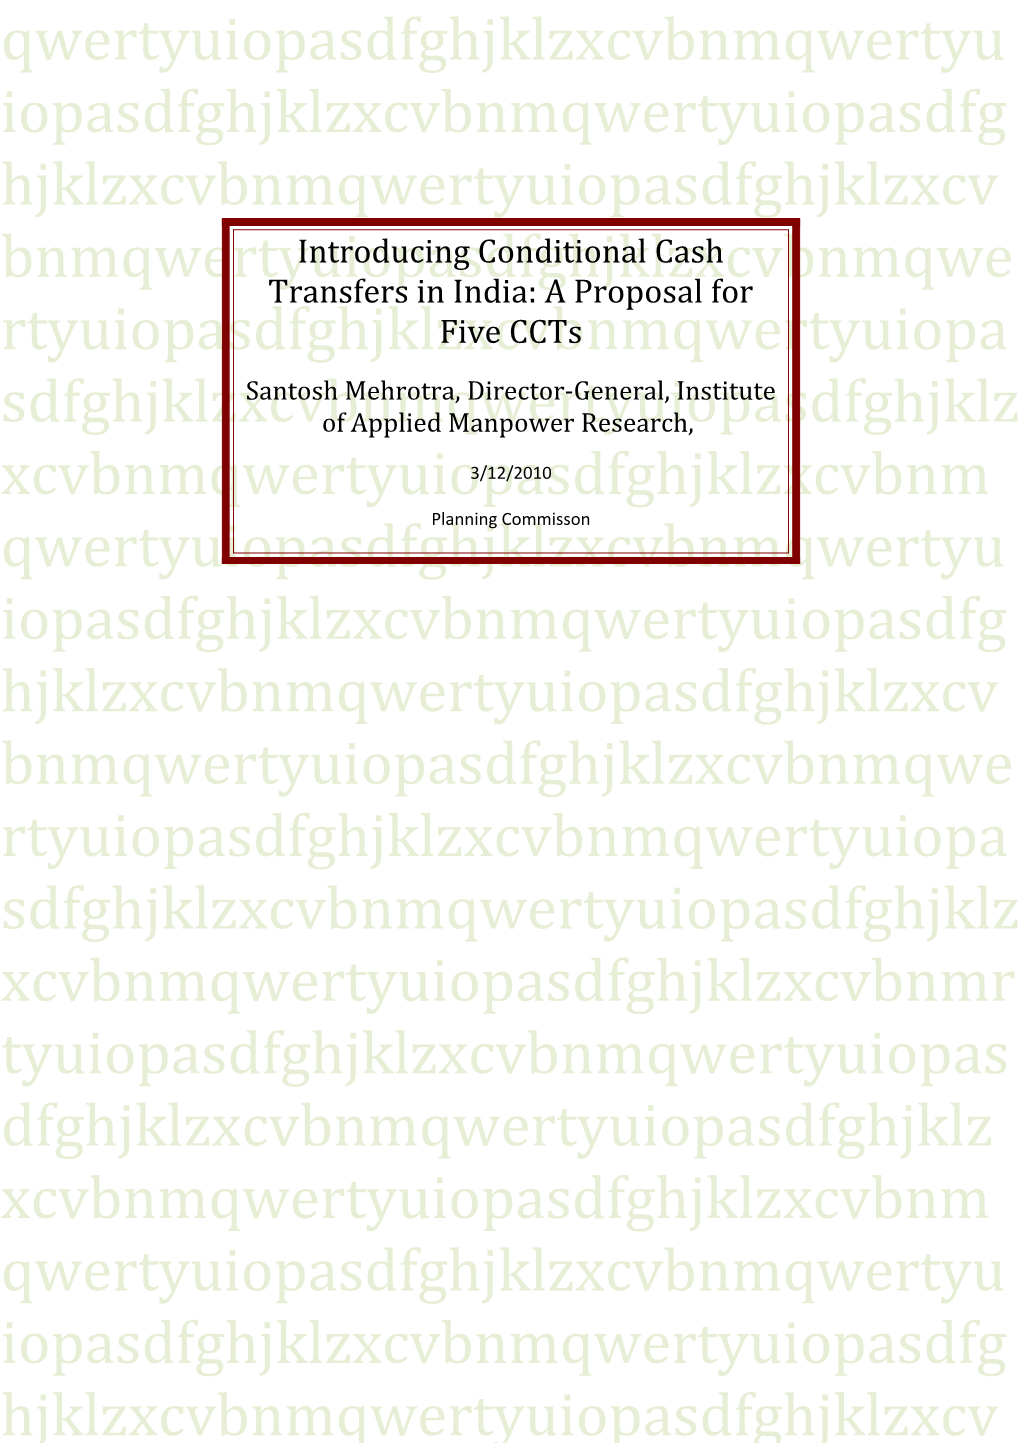 Introducing Conditional Cash Transfers in India: a Proposal for Five Ccts